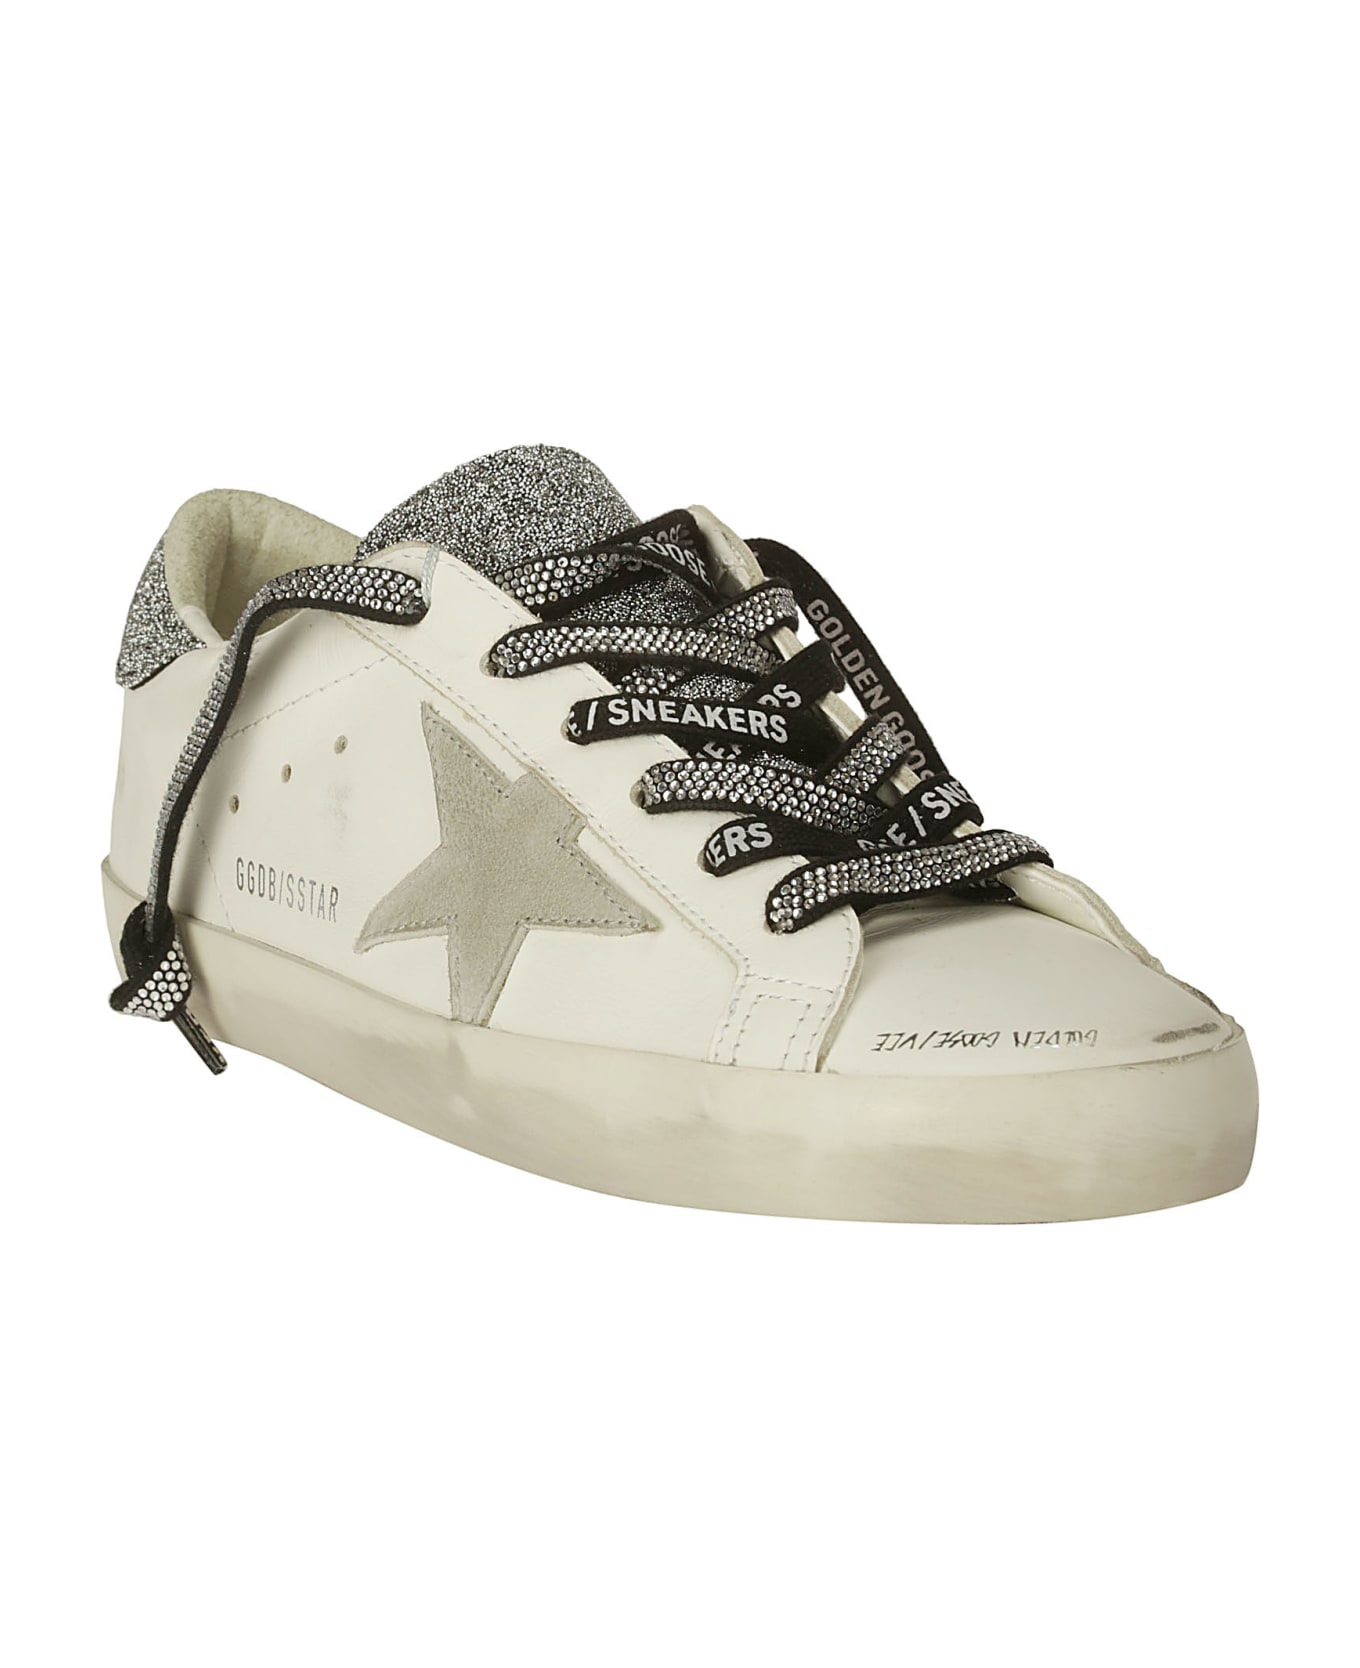 Golden Goose Super-star Sneakers - adidas Courtsmash Womens Tennis Shoes